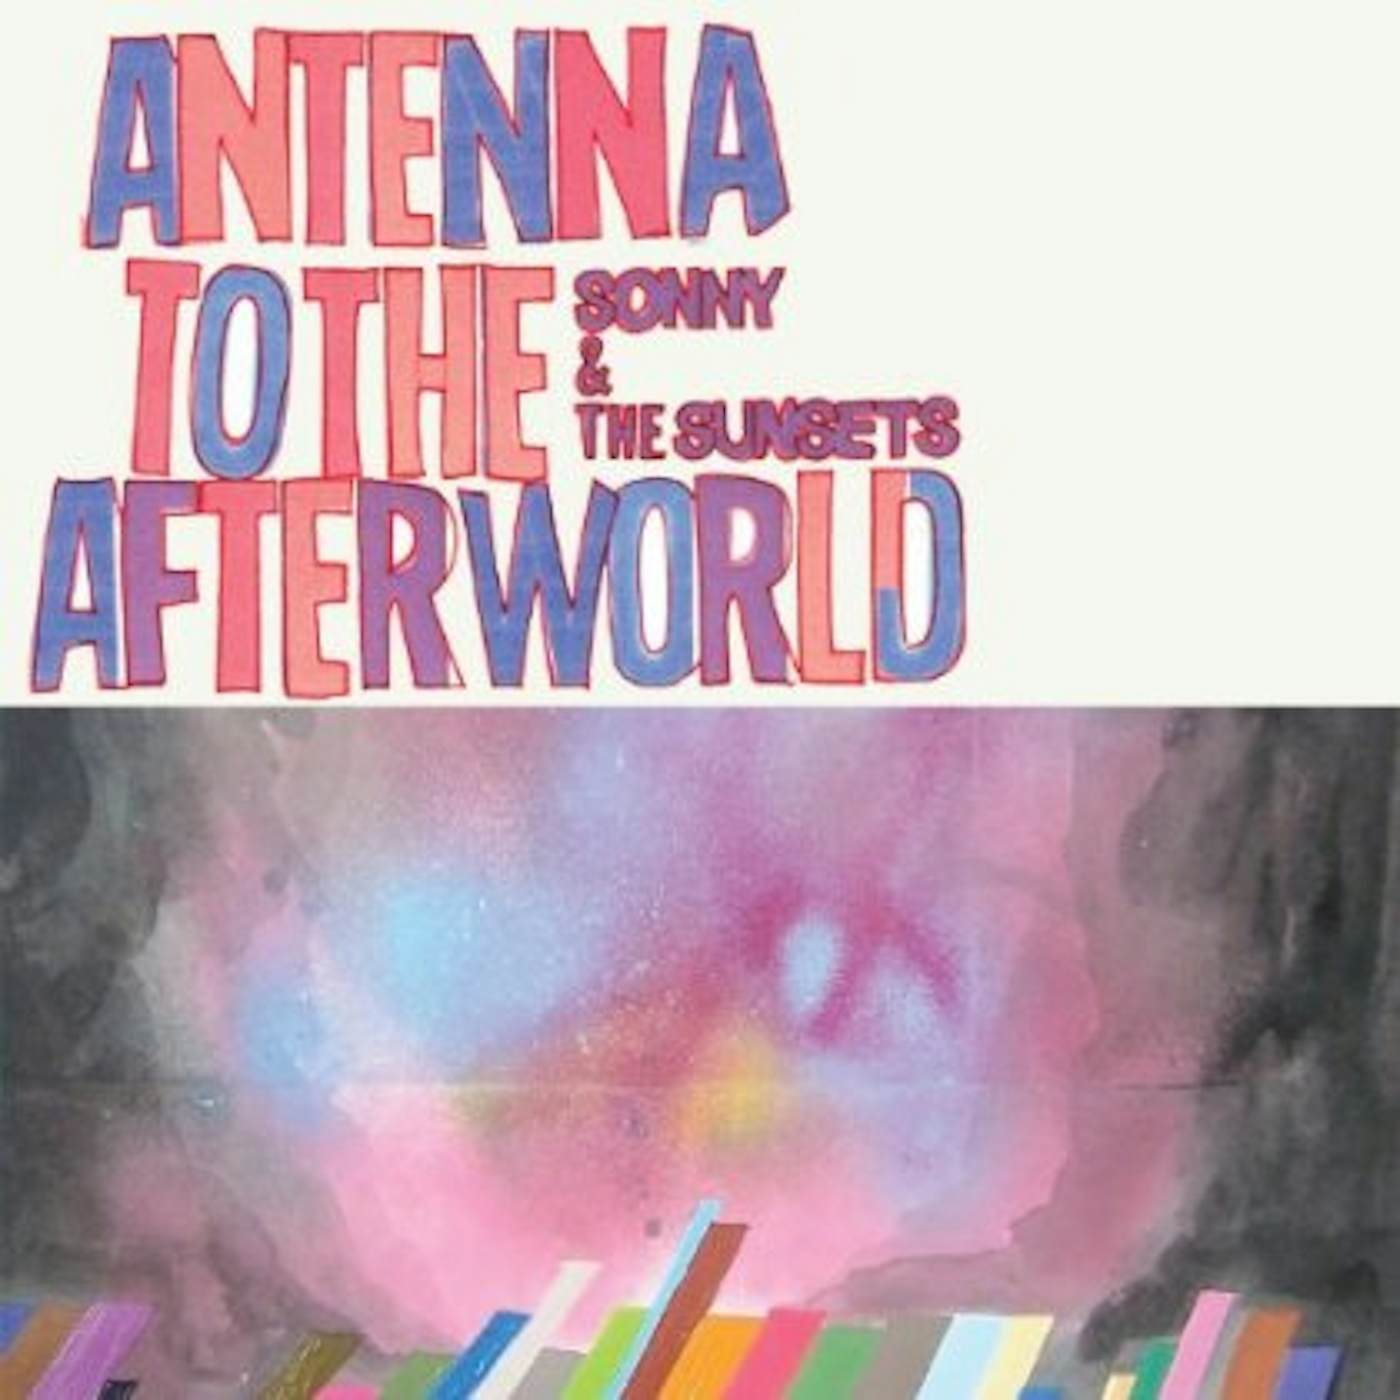 Sonny & The Sunsets ANTENNA TO THE AFTERWORLD CD